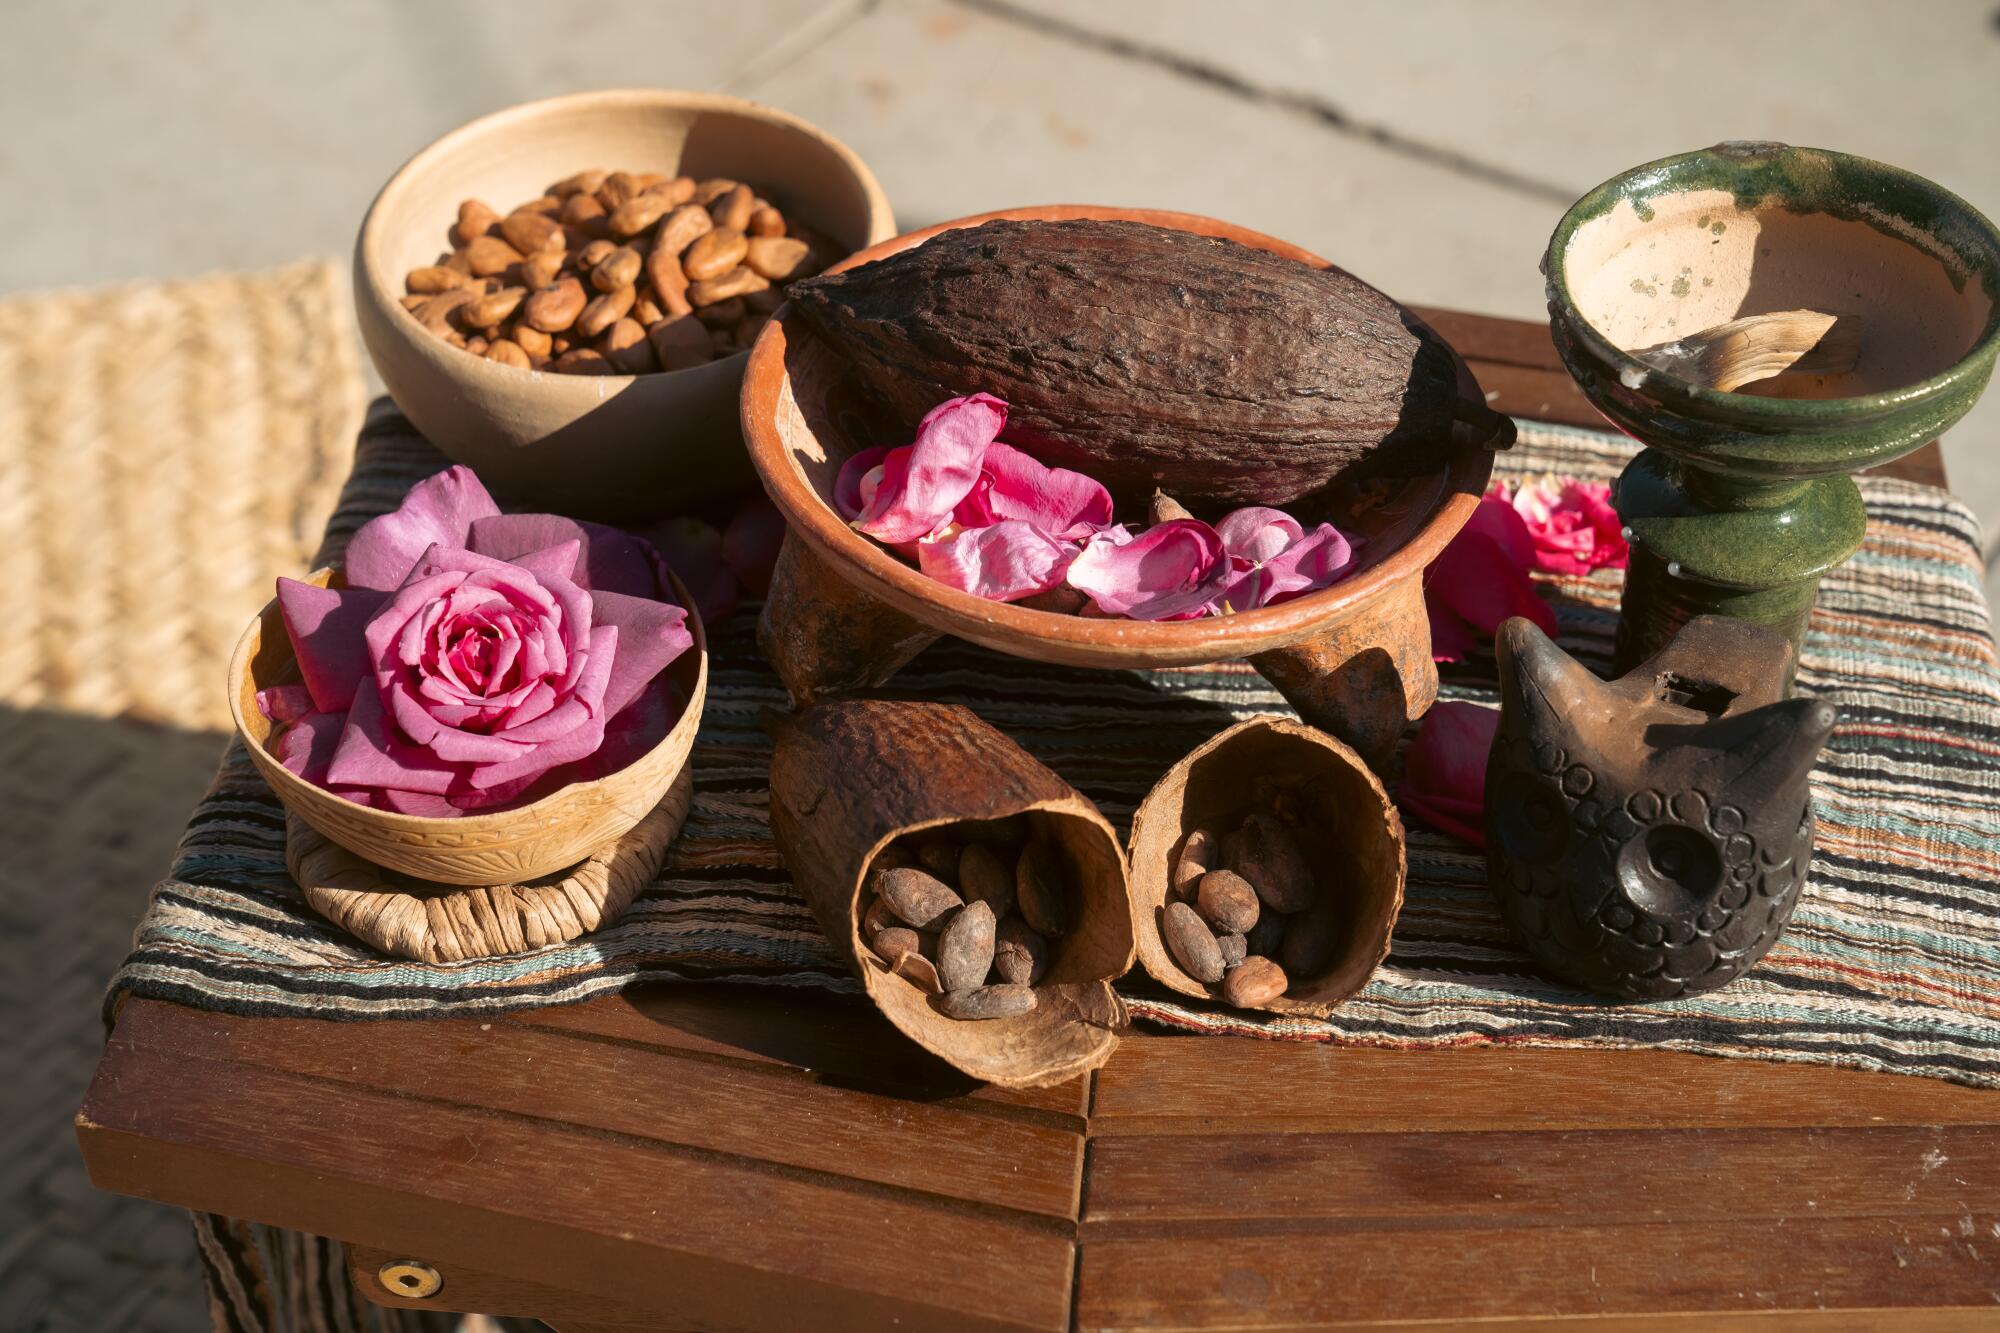 Roses, cocoa and copal on a small table.